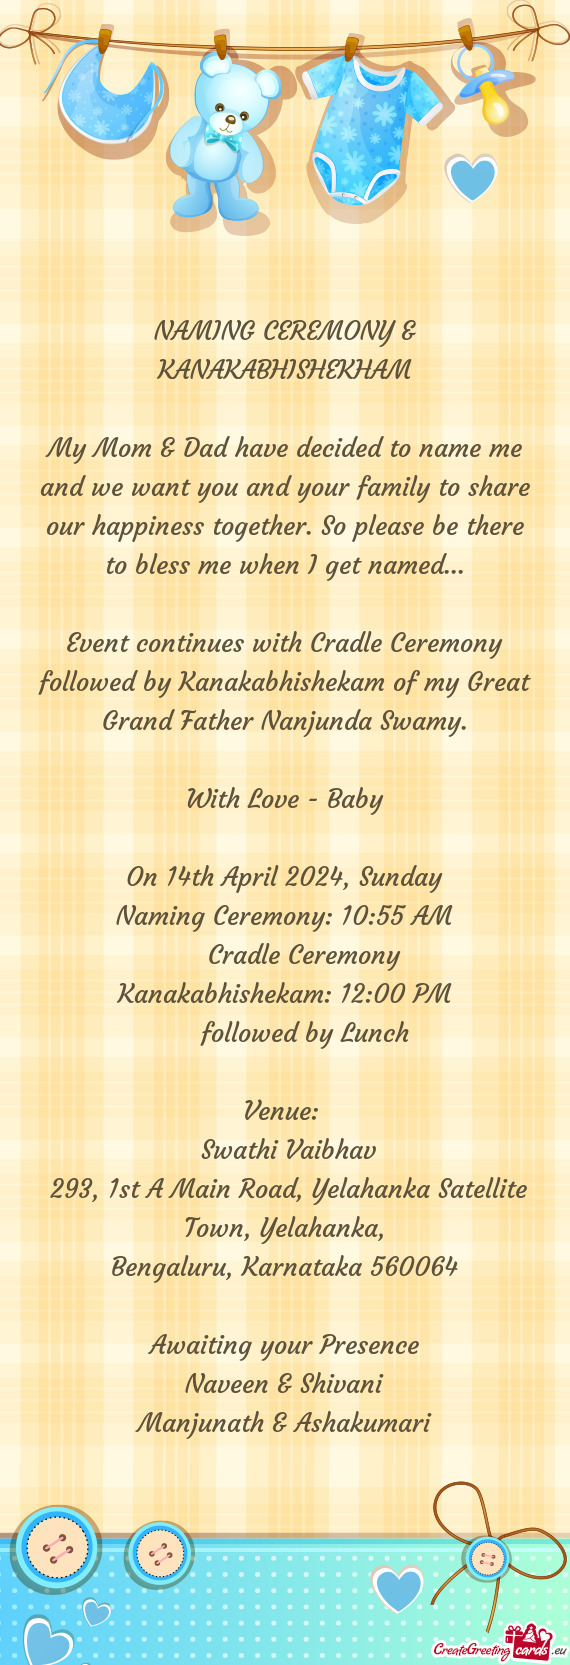 Event continues with Cradle Ceremony followed by Kanakabhishekam of my Great Grand Father Nanjunda S